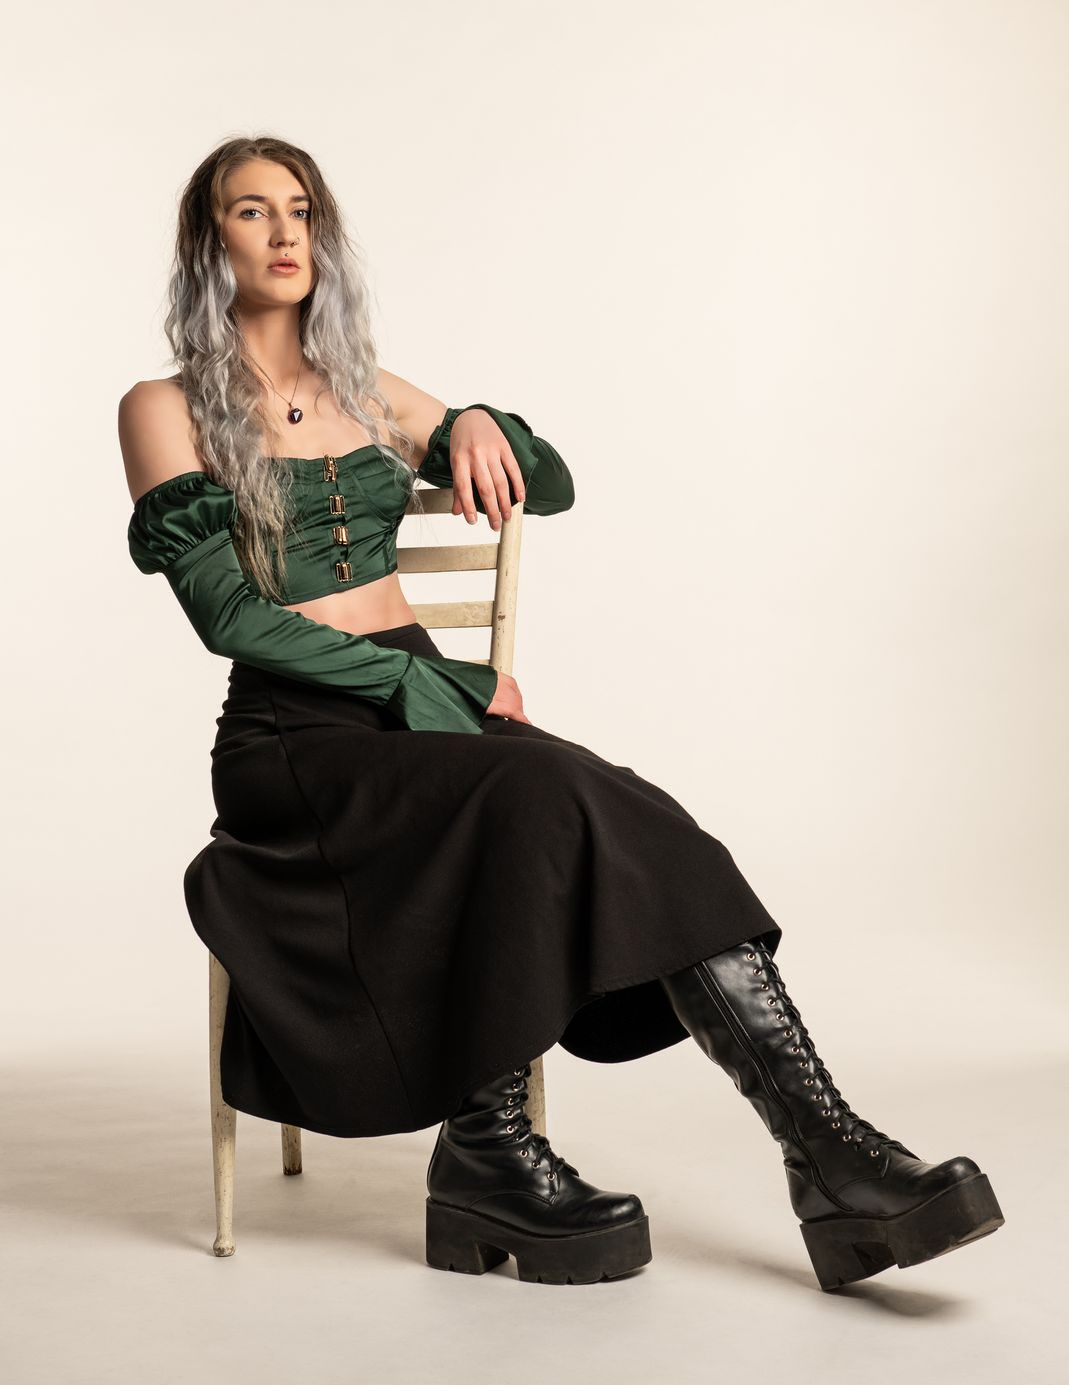 Woman in green with black boot sitting on a chair